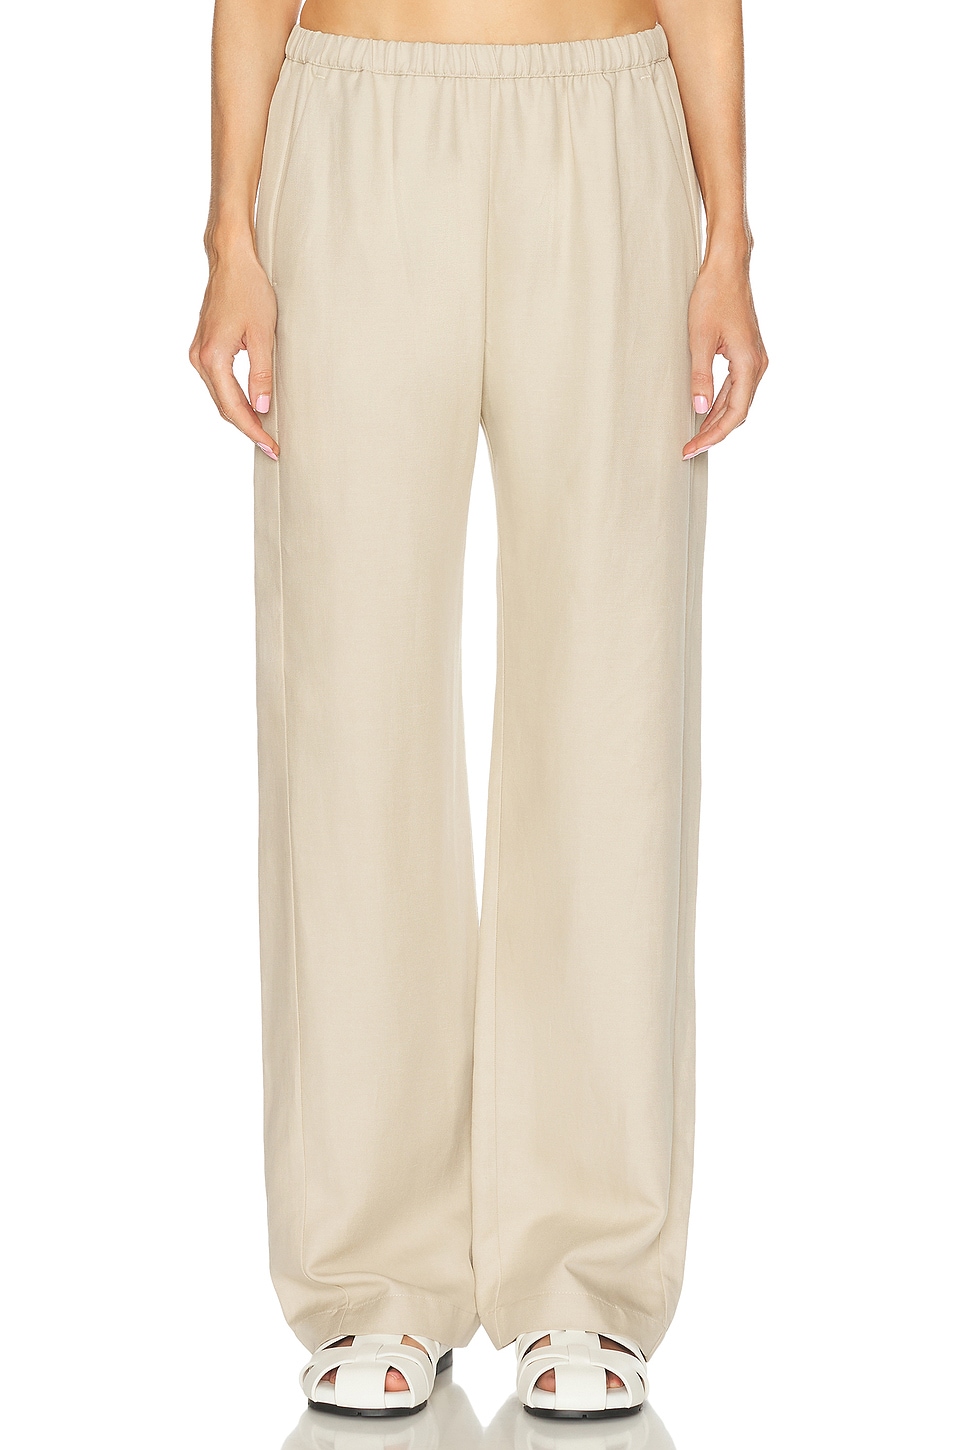 Image 1 of Enza Costa Twill Everywhere Pant in Stone